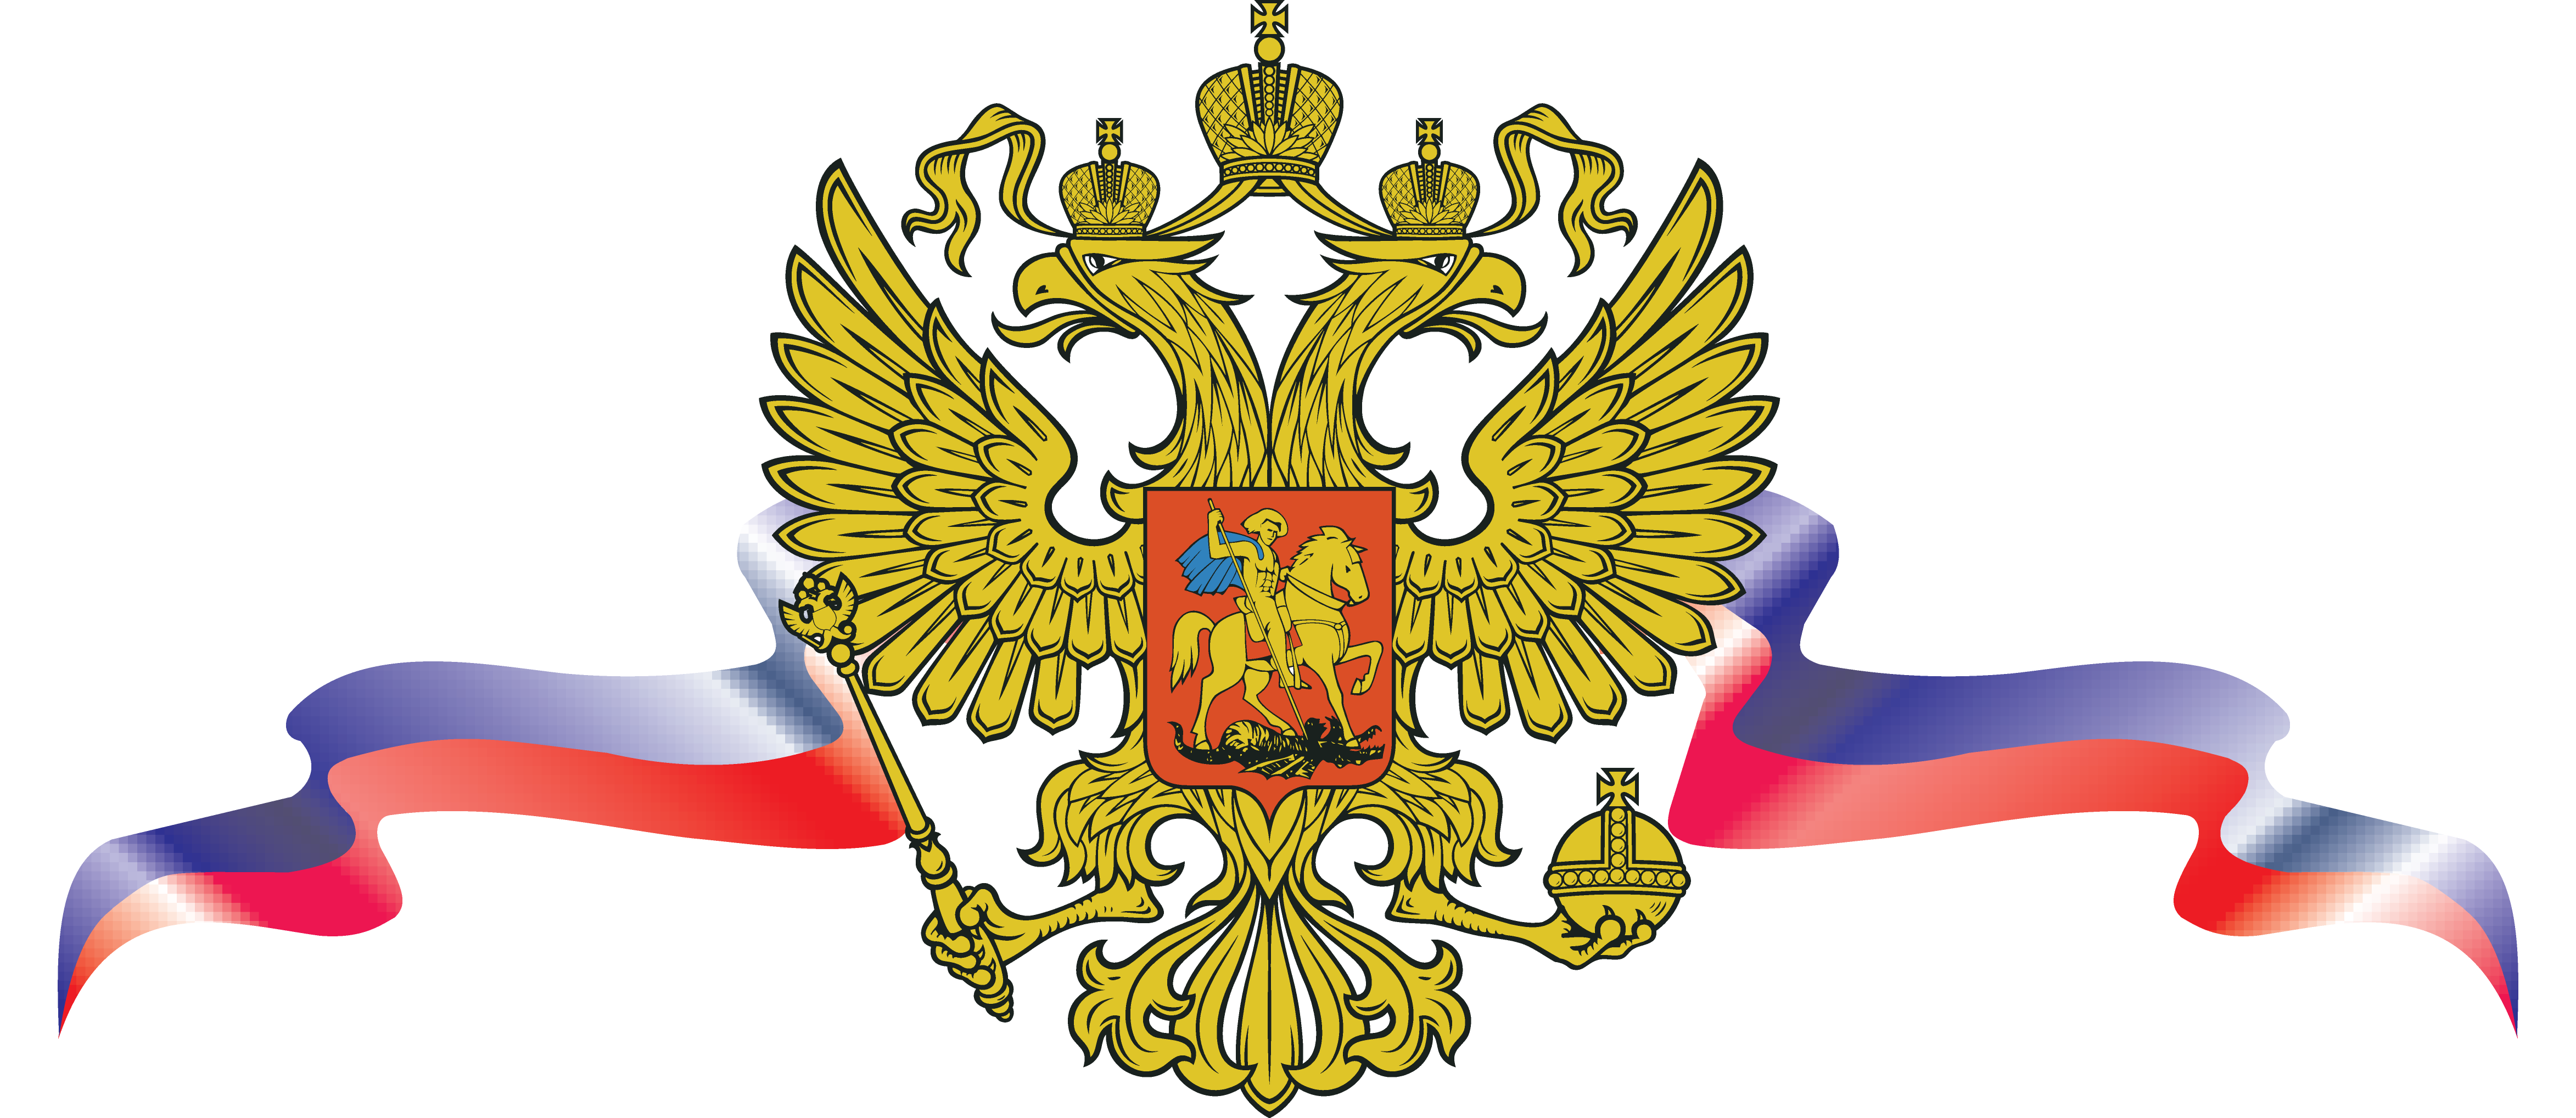 Russian Empire Flag Of Russia Coat Of Arms Of Russia PNG, Clipart, Coat Of  Arms, Coat, russia flag with coat of arms 